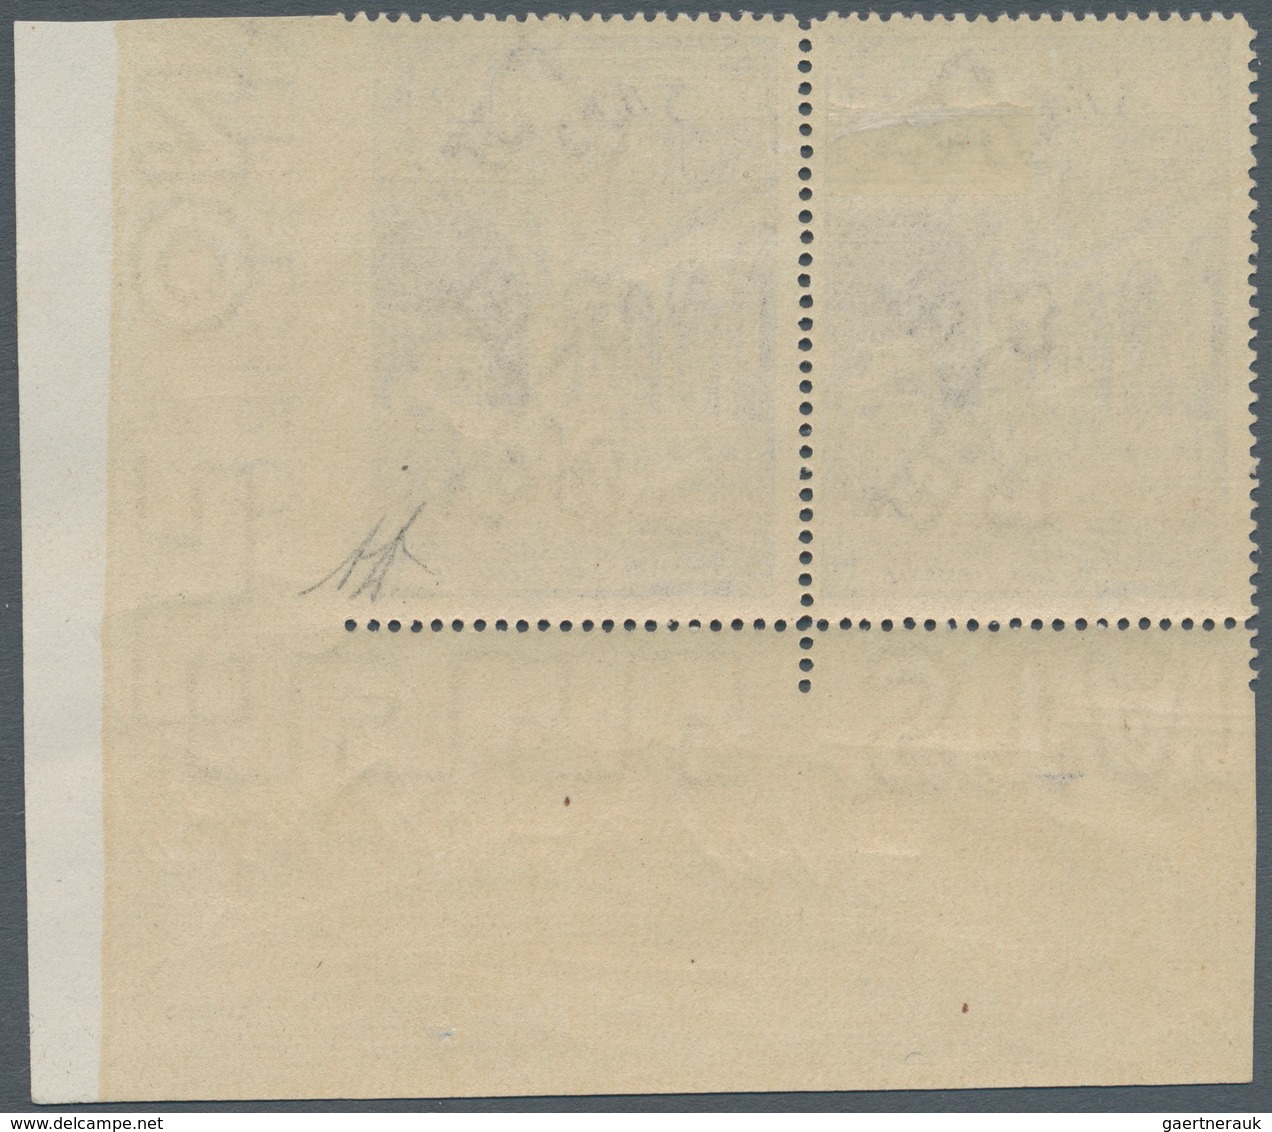 Vatikan: 1949, 3 L Violet "basilicas", Horizontal Pair From Lower Right Corner With Imperforated Rig - Unused Stamps